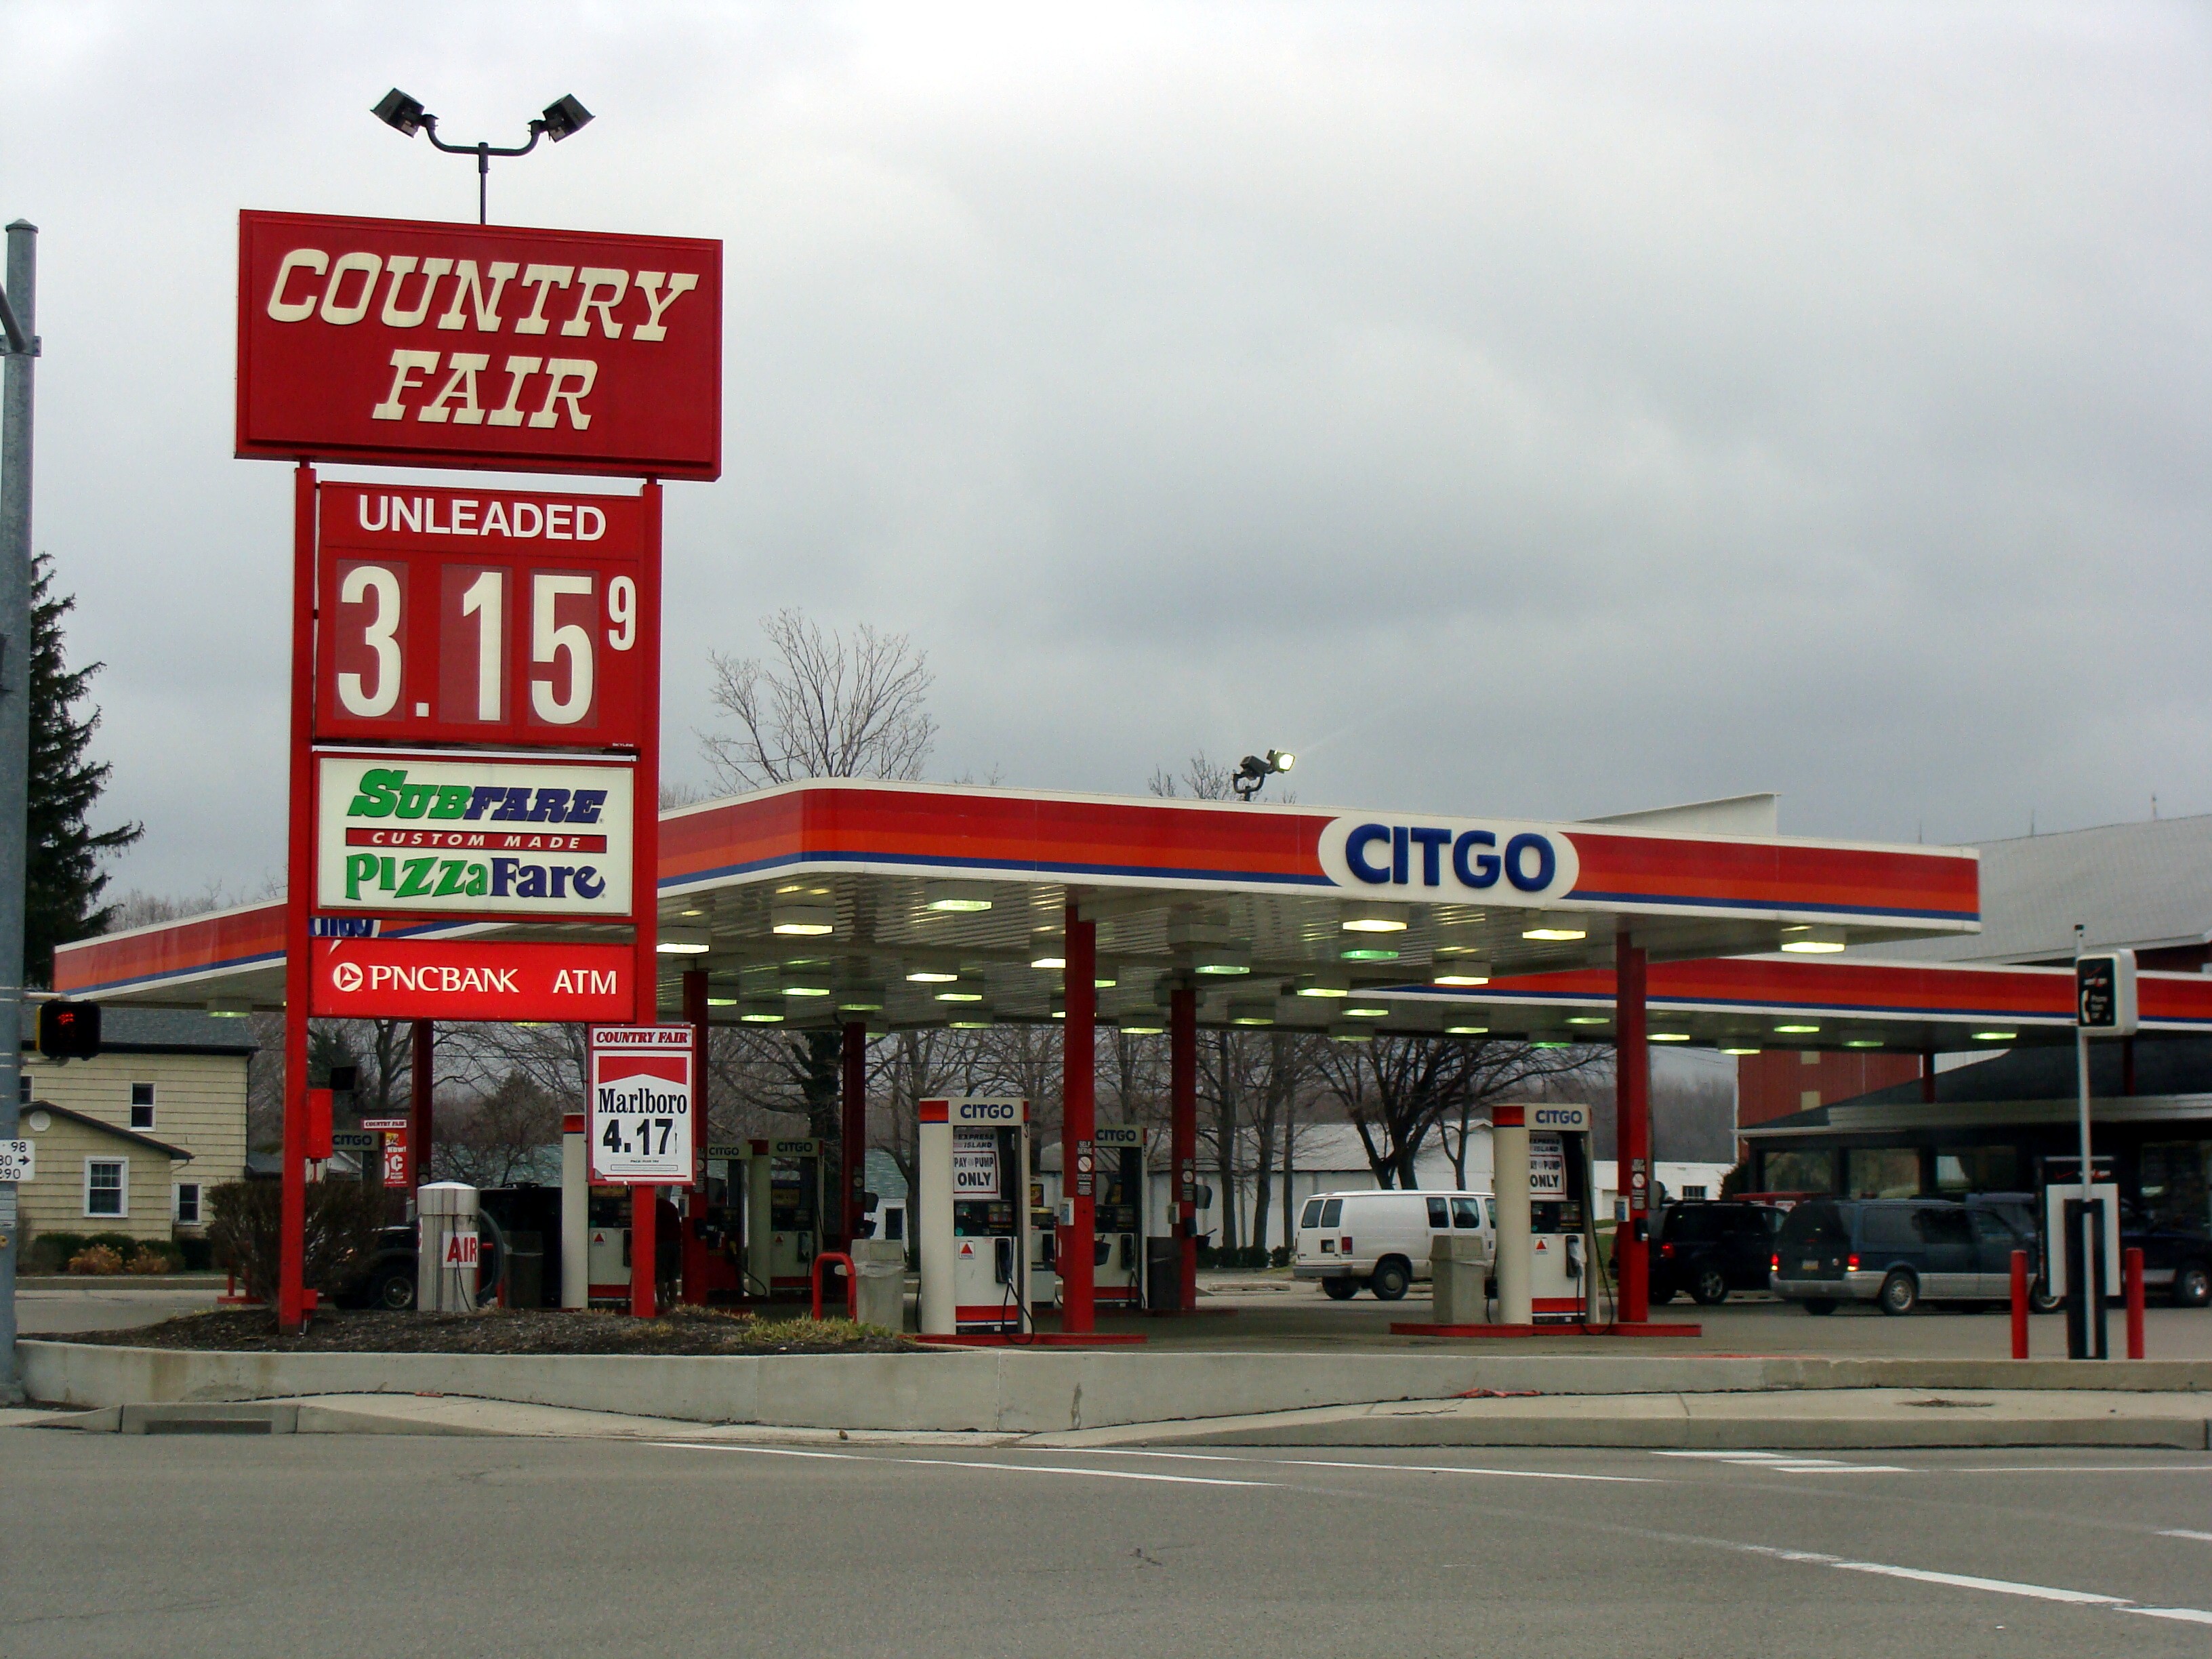 File:Country Fair gas station.jpg - Wikipedia